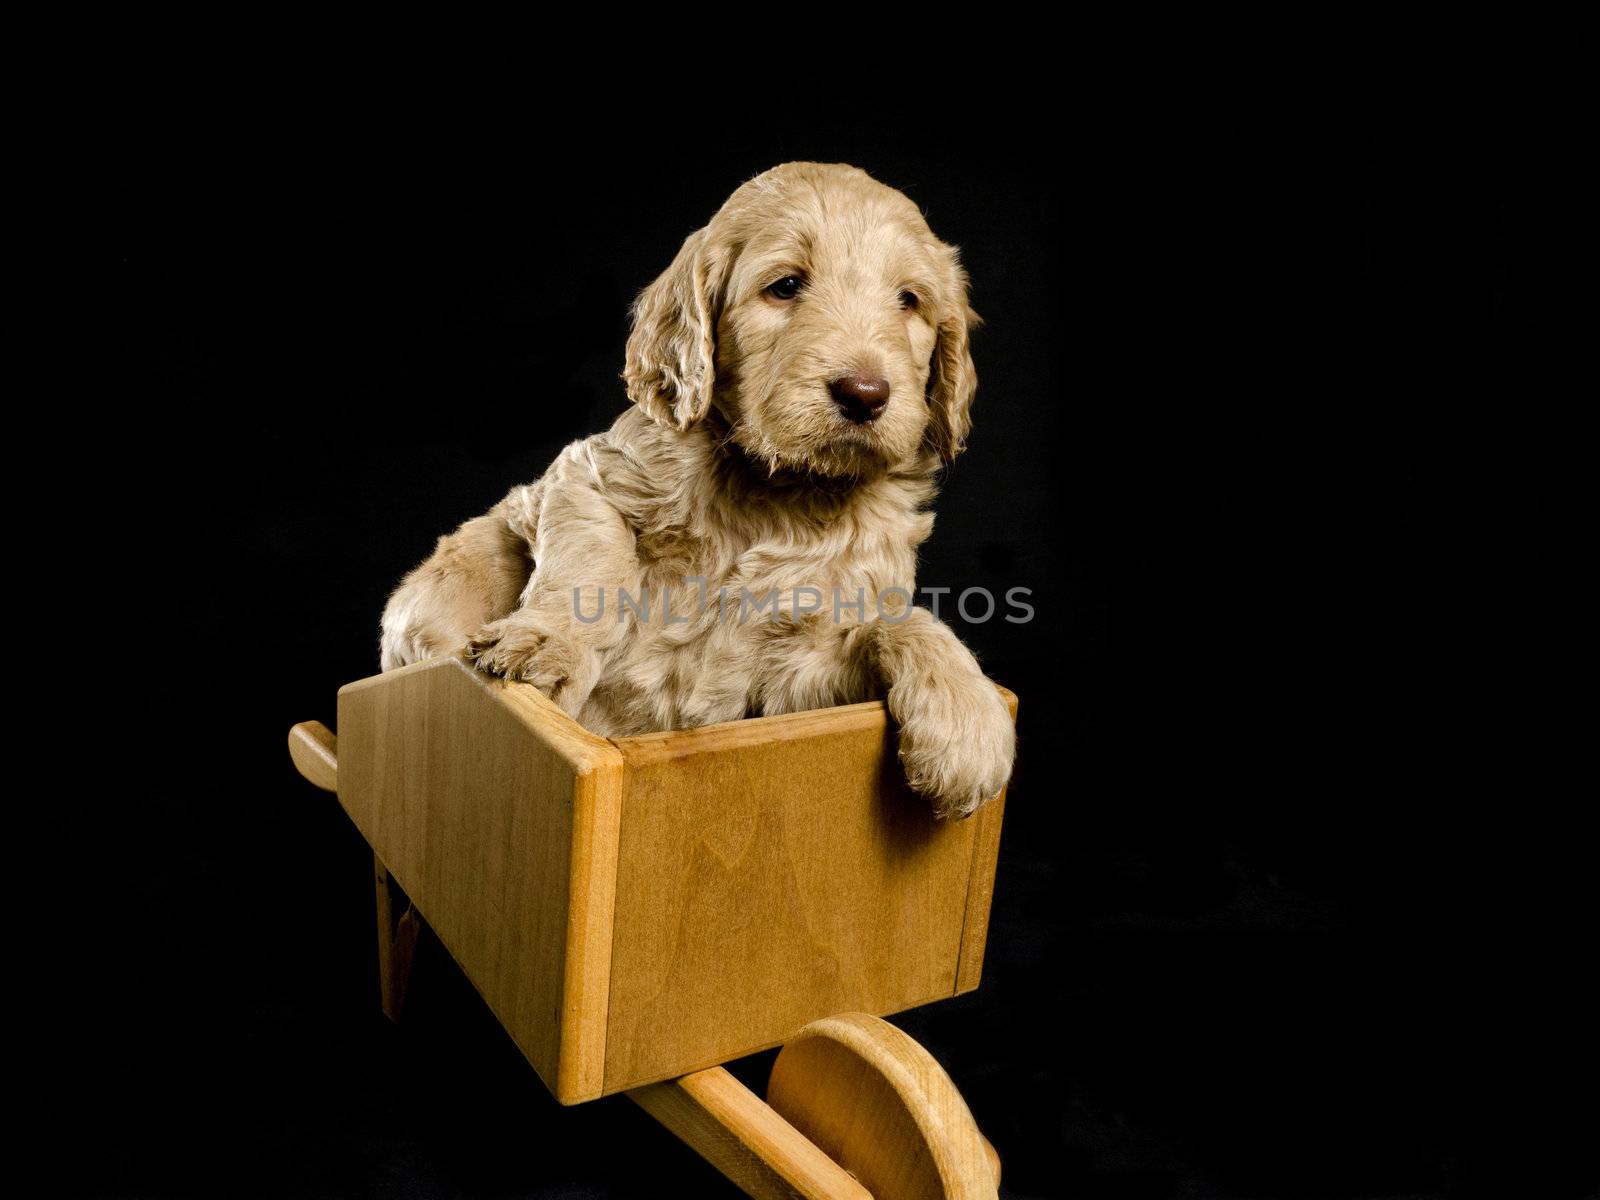 Labradoodle puppy in a toy wheel barrow on a blackground